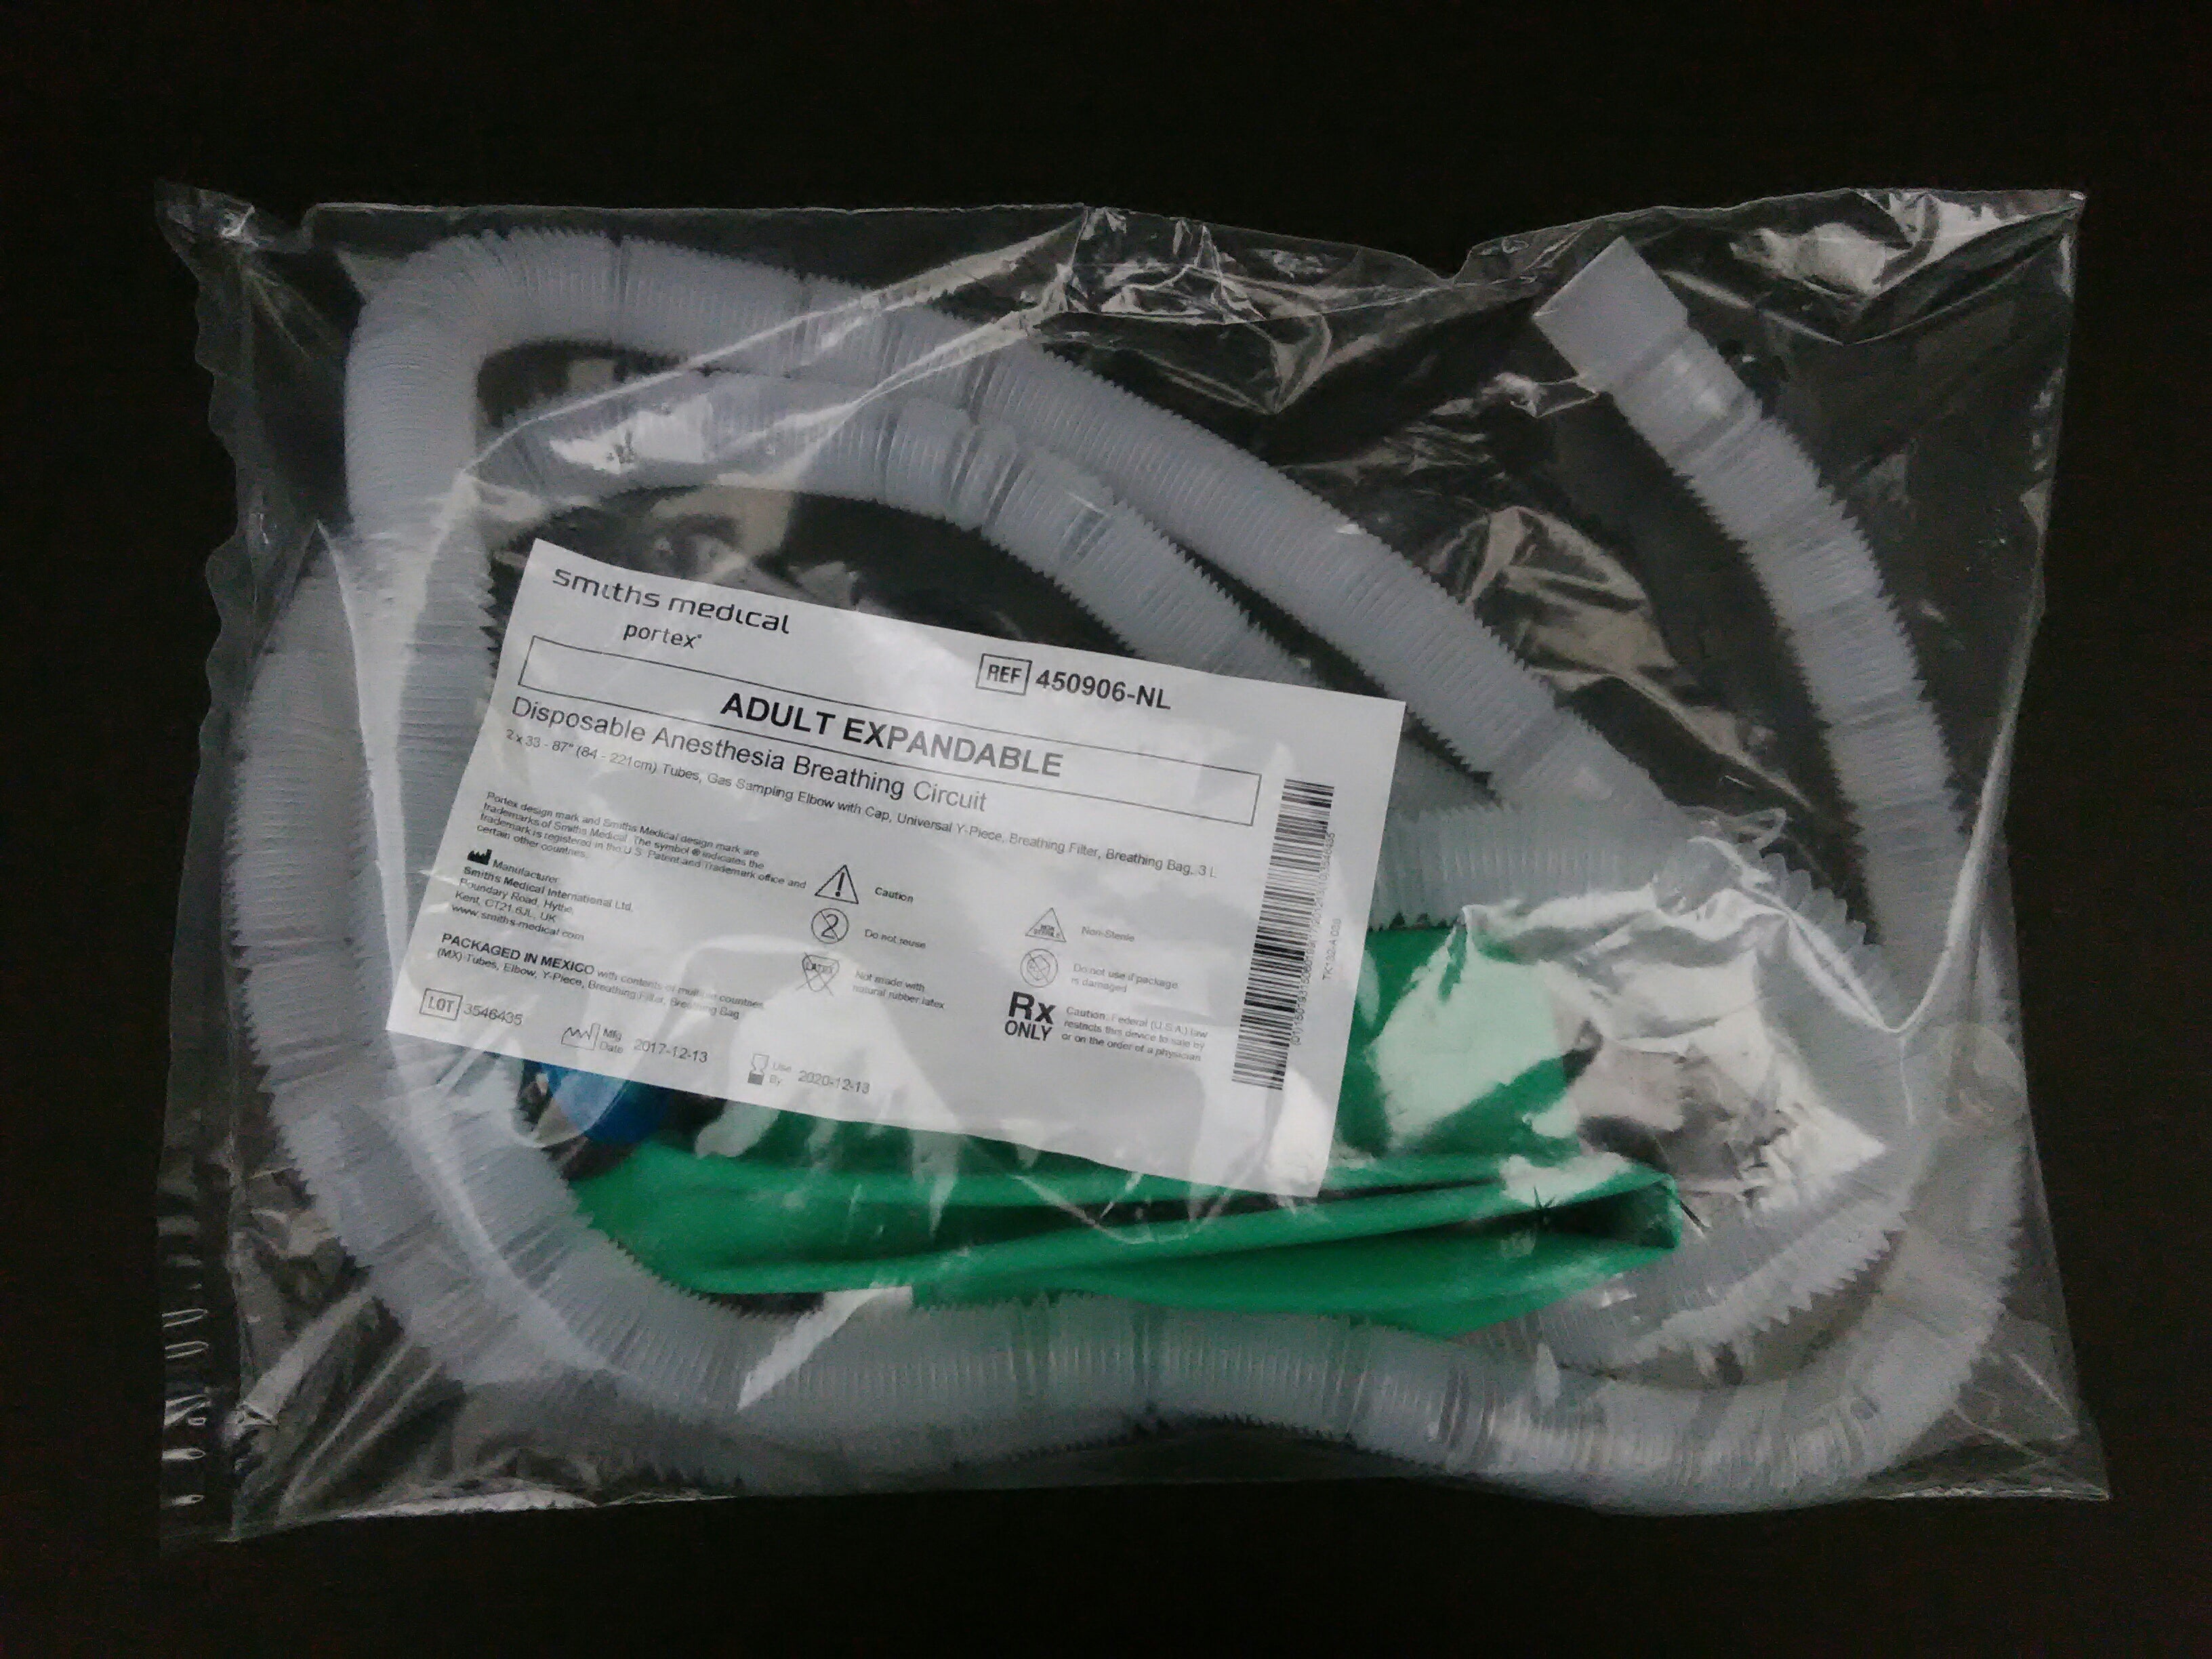 SMITHS MEDICAL / JELCO 450906-NL CIRCUIT ANESTHESIA ADULT 50.8MMDIA 33 - 87INL EXPA